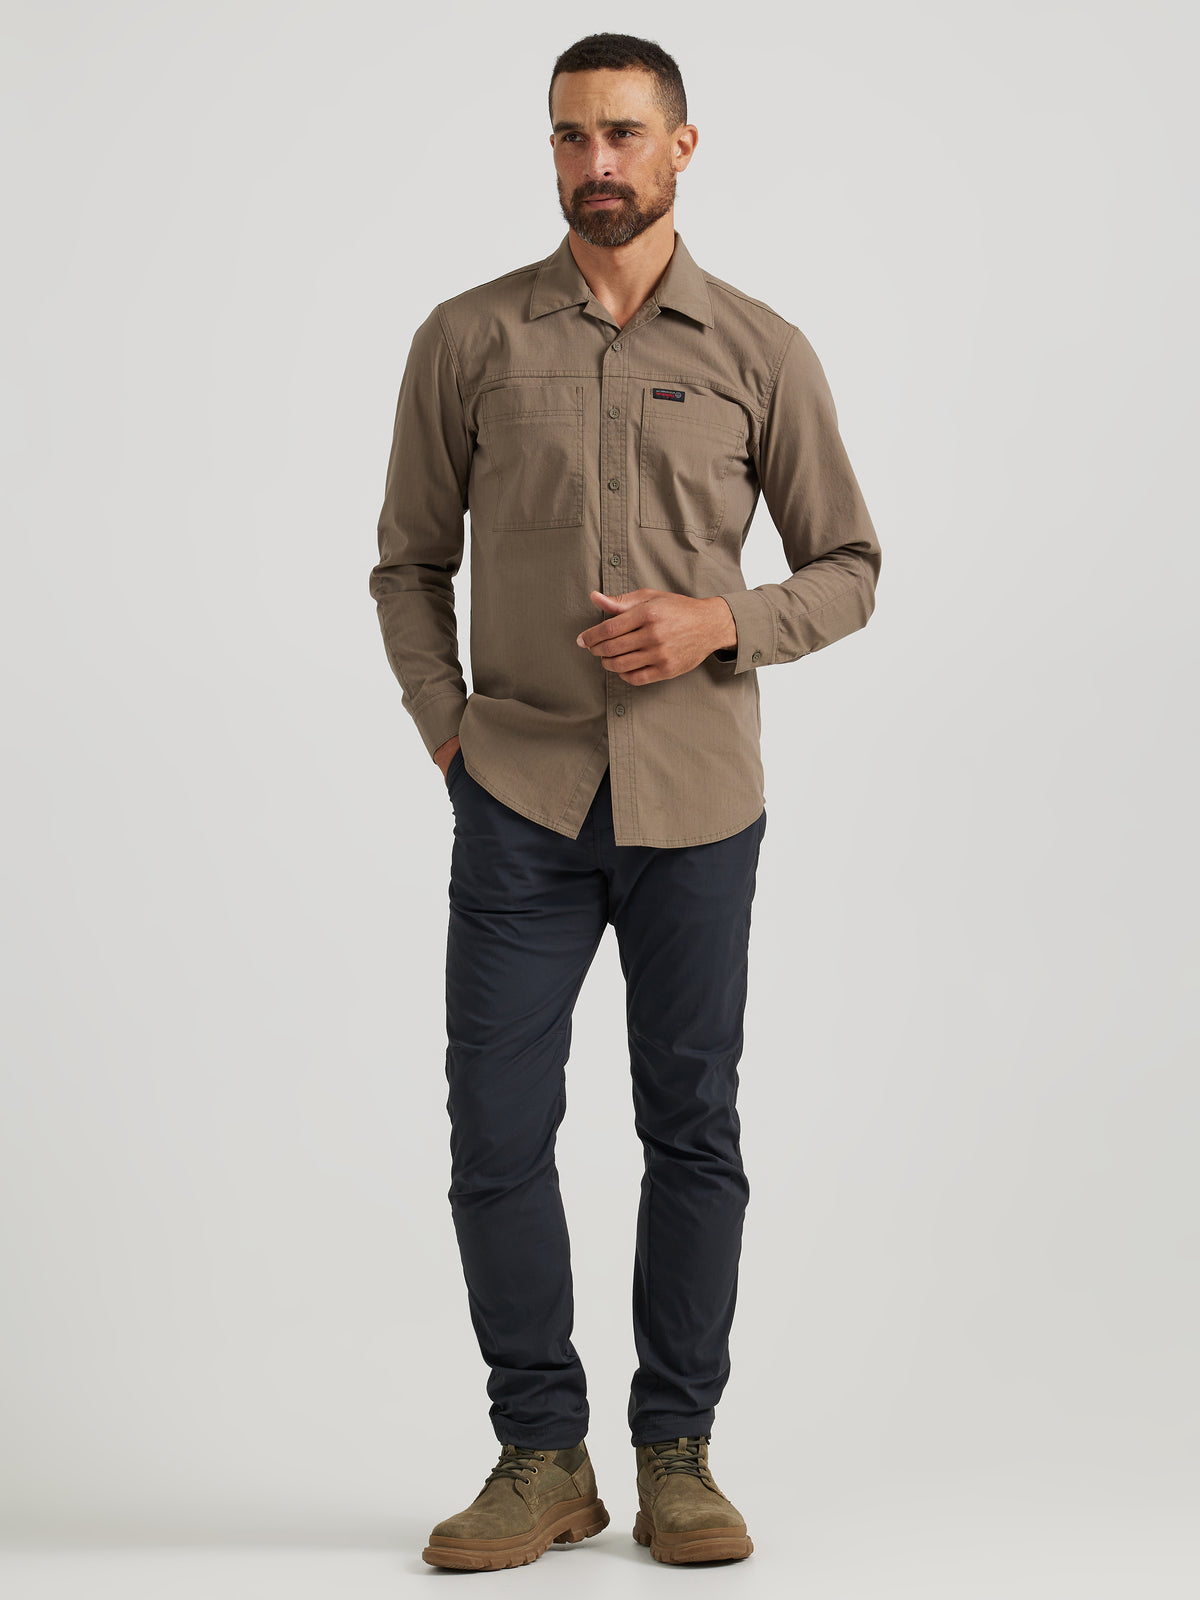 LS Rugged Utility Shirt in Bungee Cord